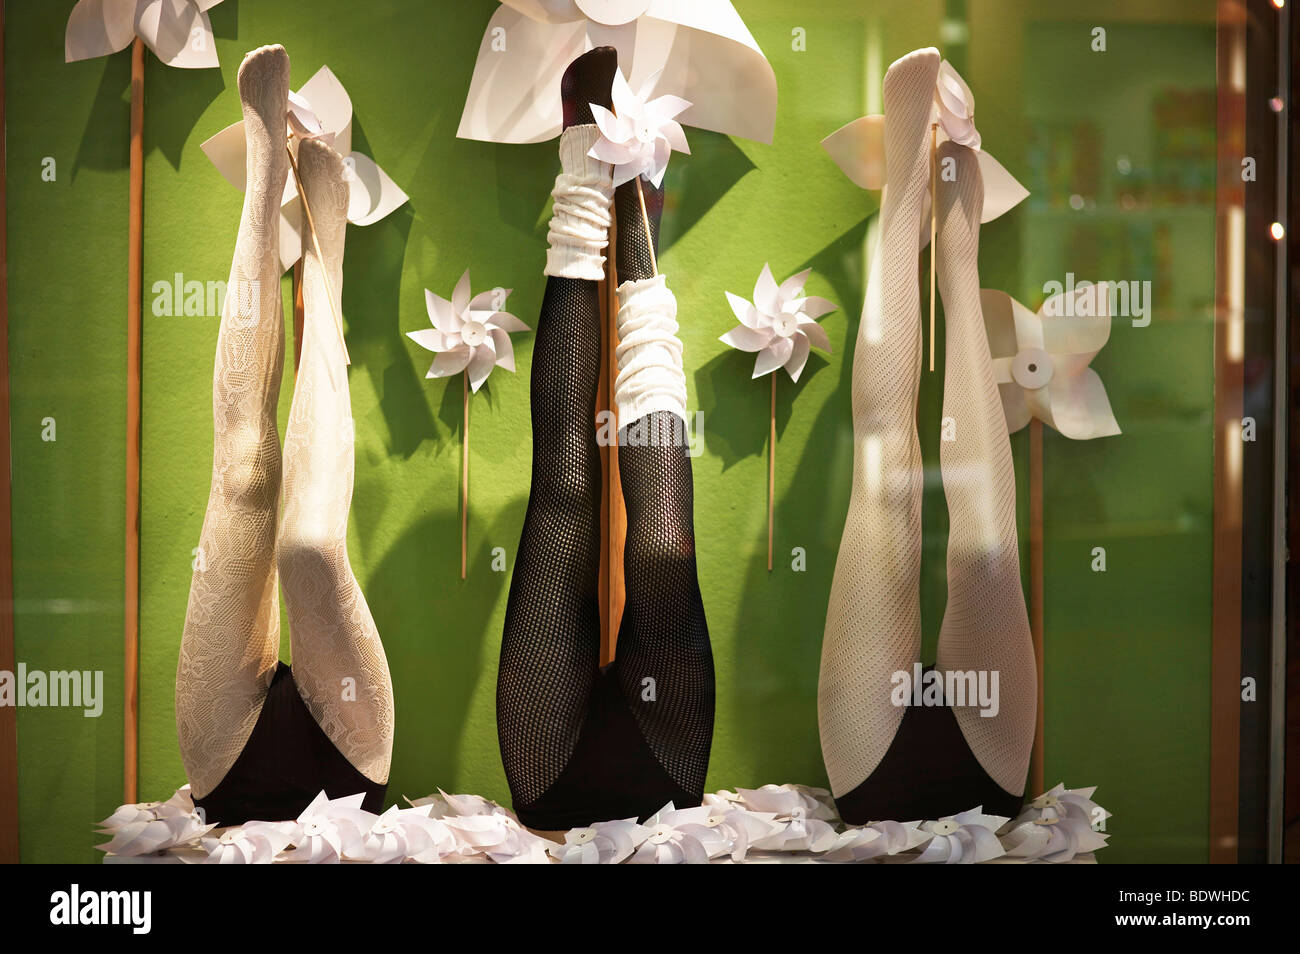 Window display, with wind wheels and legs of window dummies, advertising tights Stock Photo